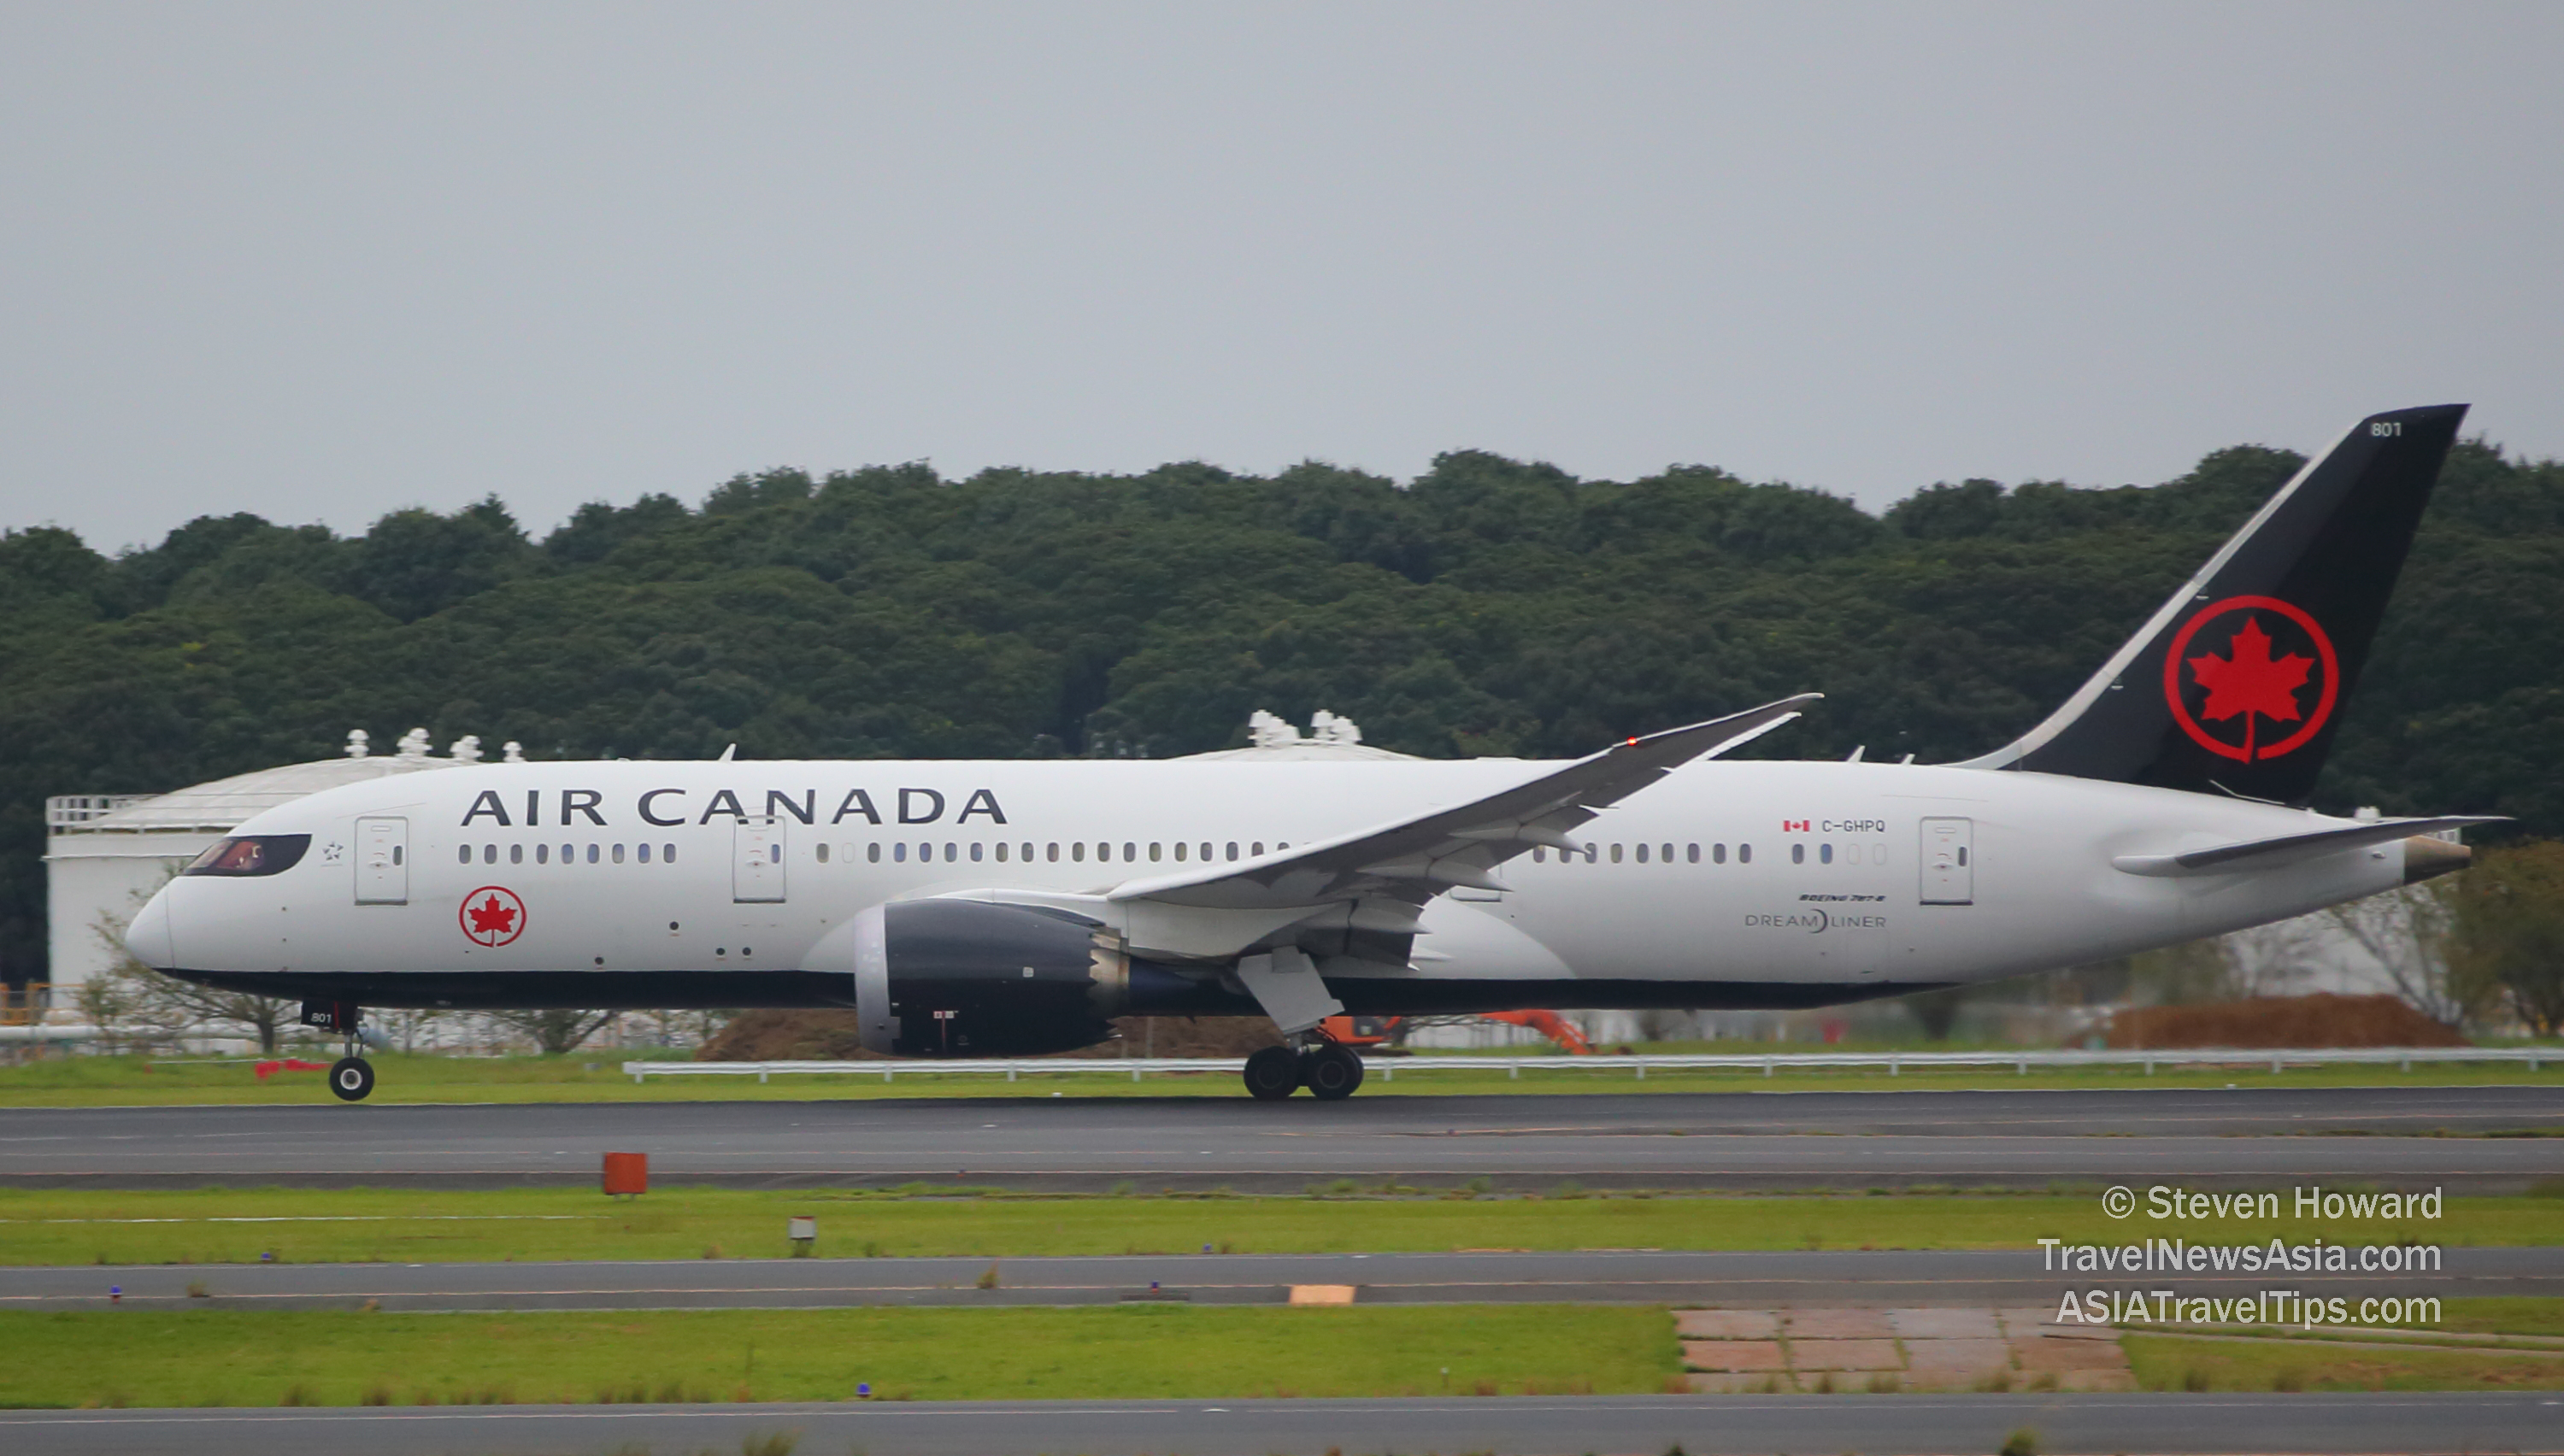 Air Canada Boeing 787-8 reg: C-GHPQ. Picture by Steven Howard of TravelNewsAsia.com Click to enlarge.